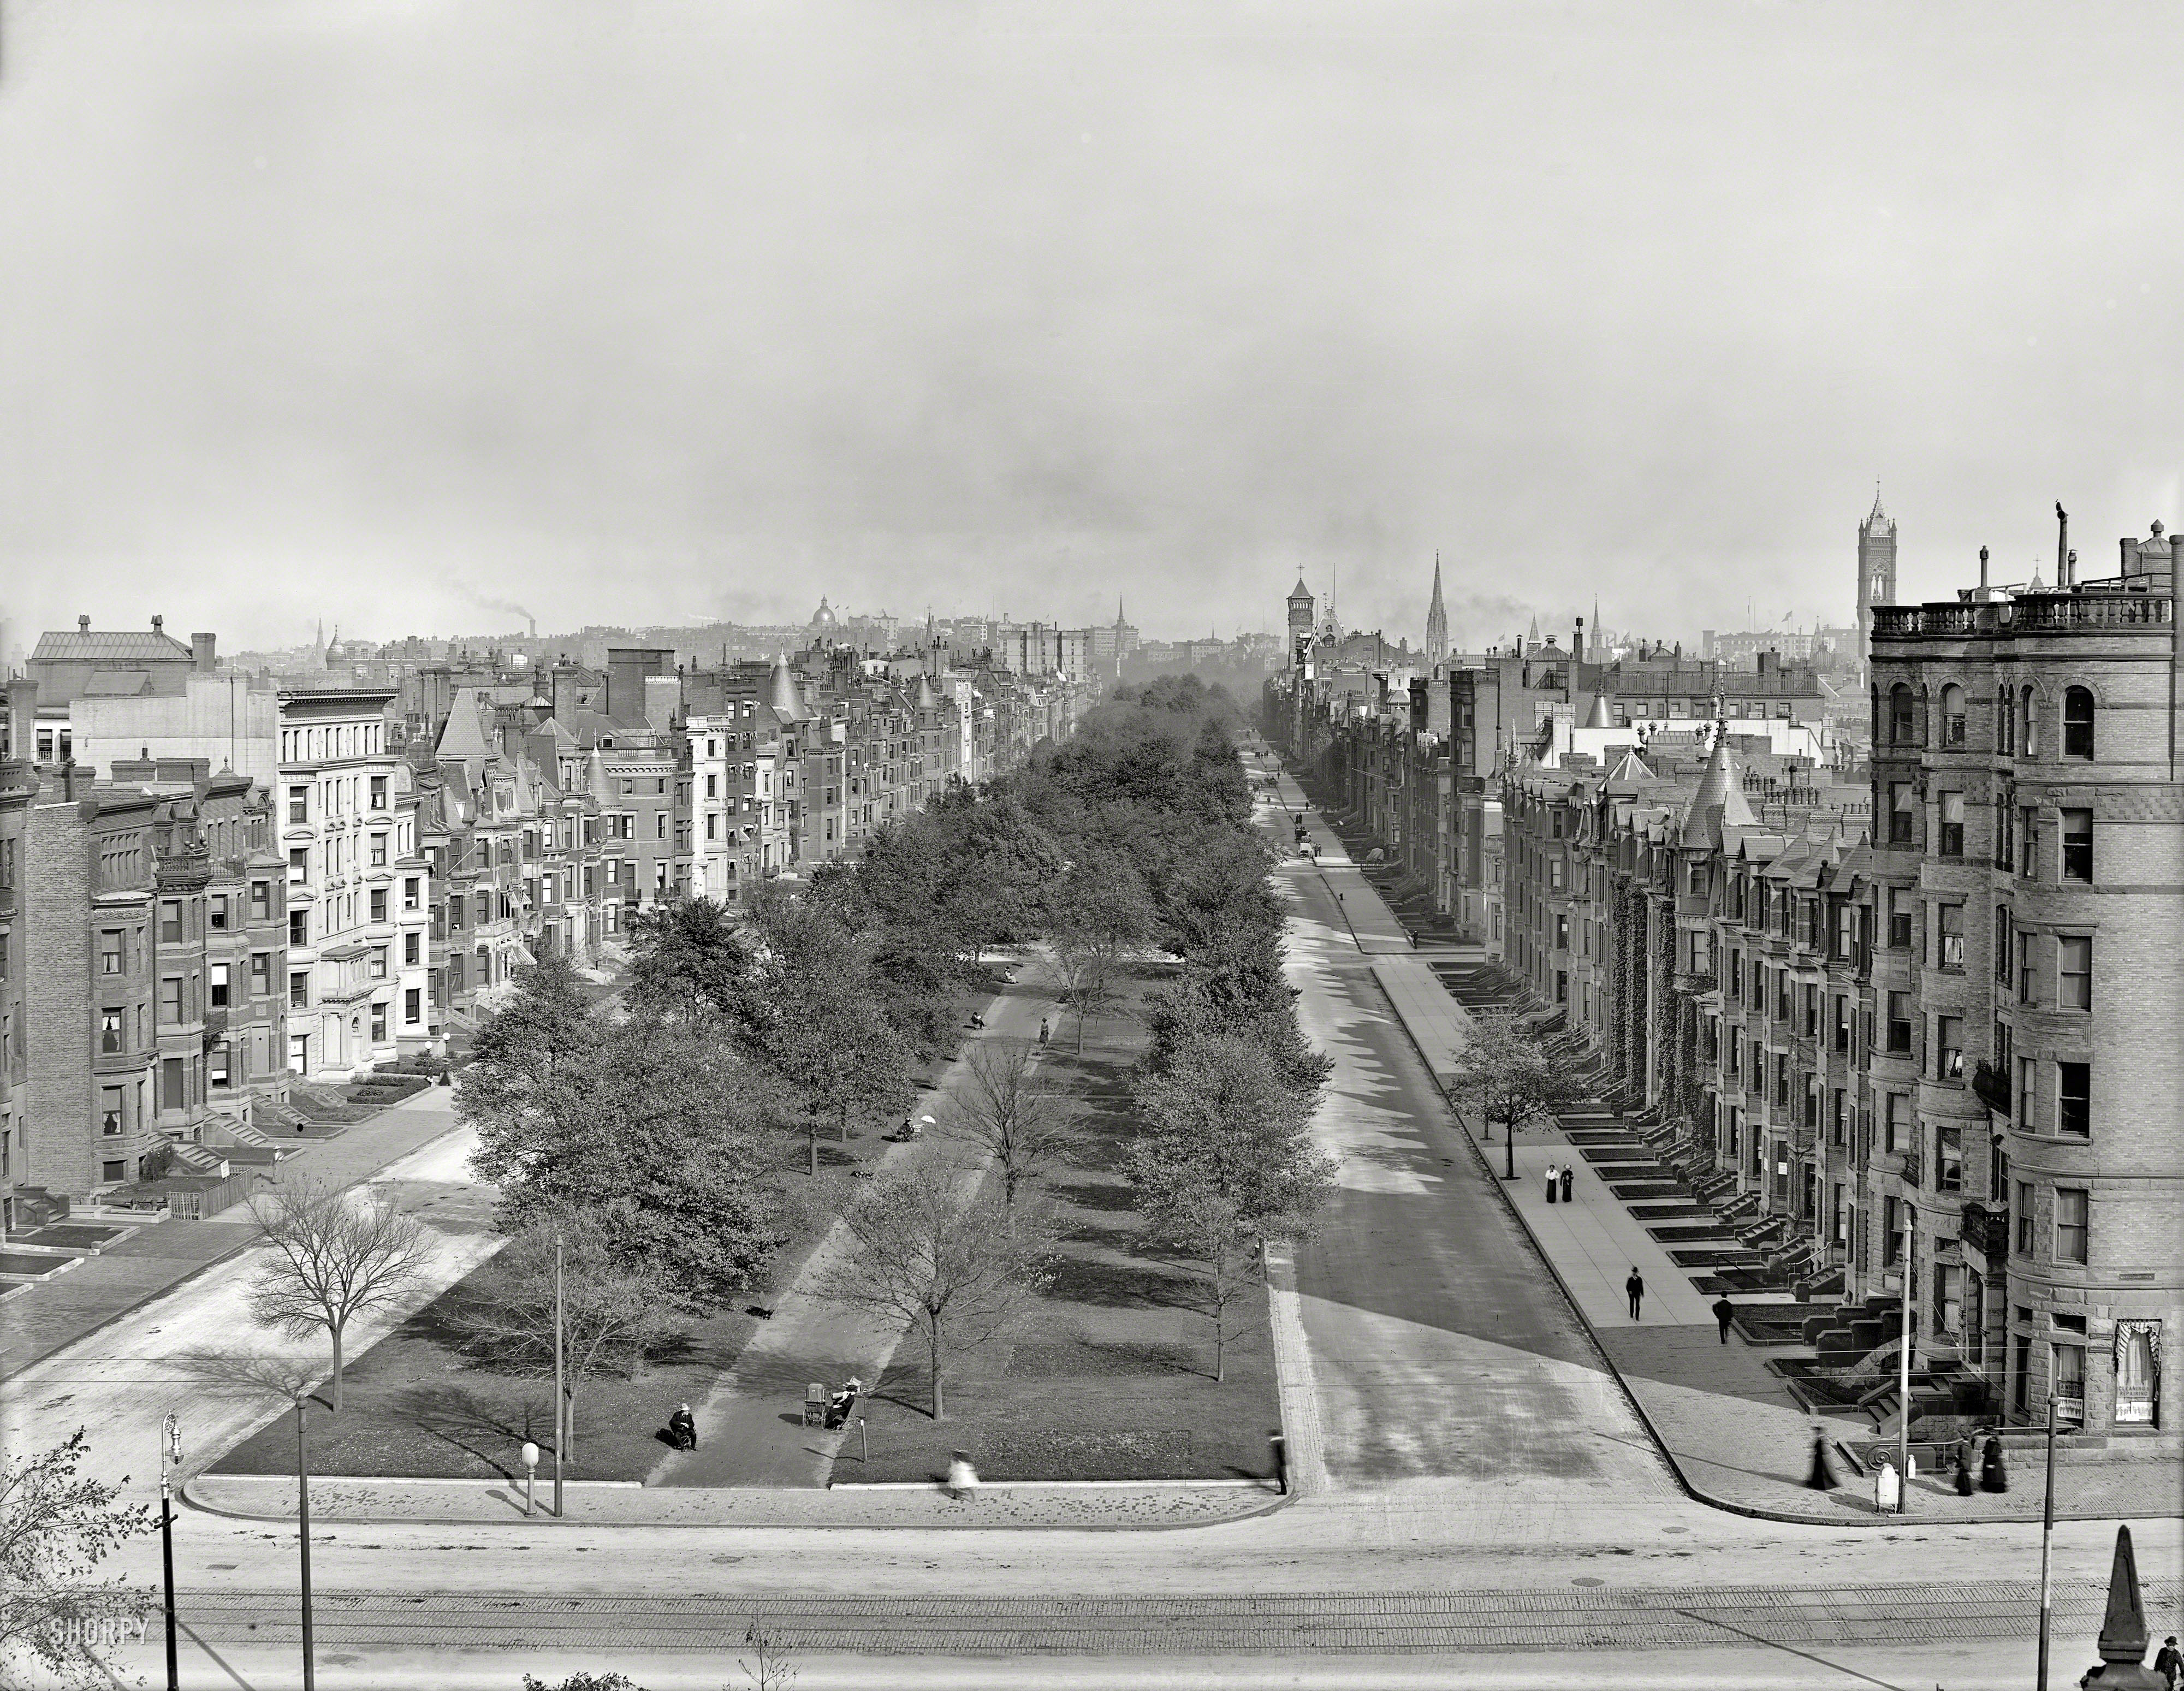 Circa 1904. "Commonwealth Avenue, Boston." An ultra-detailed view of bustling Beantown. 8x10 glass negative, Detroit Publishing Company. View full size.